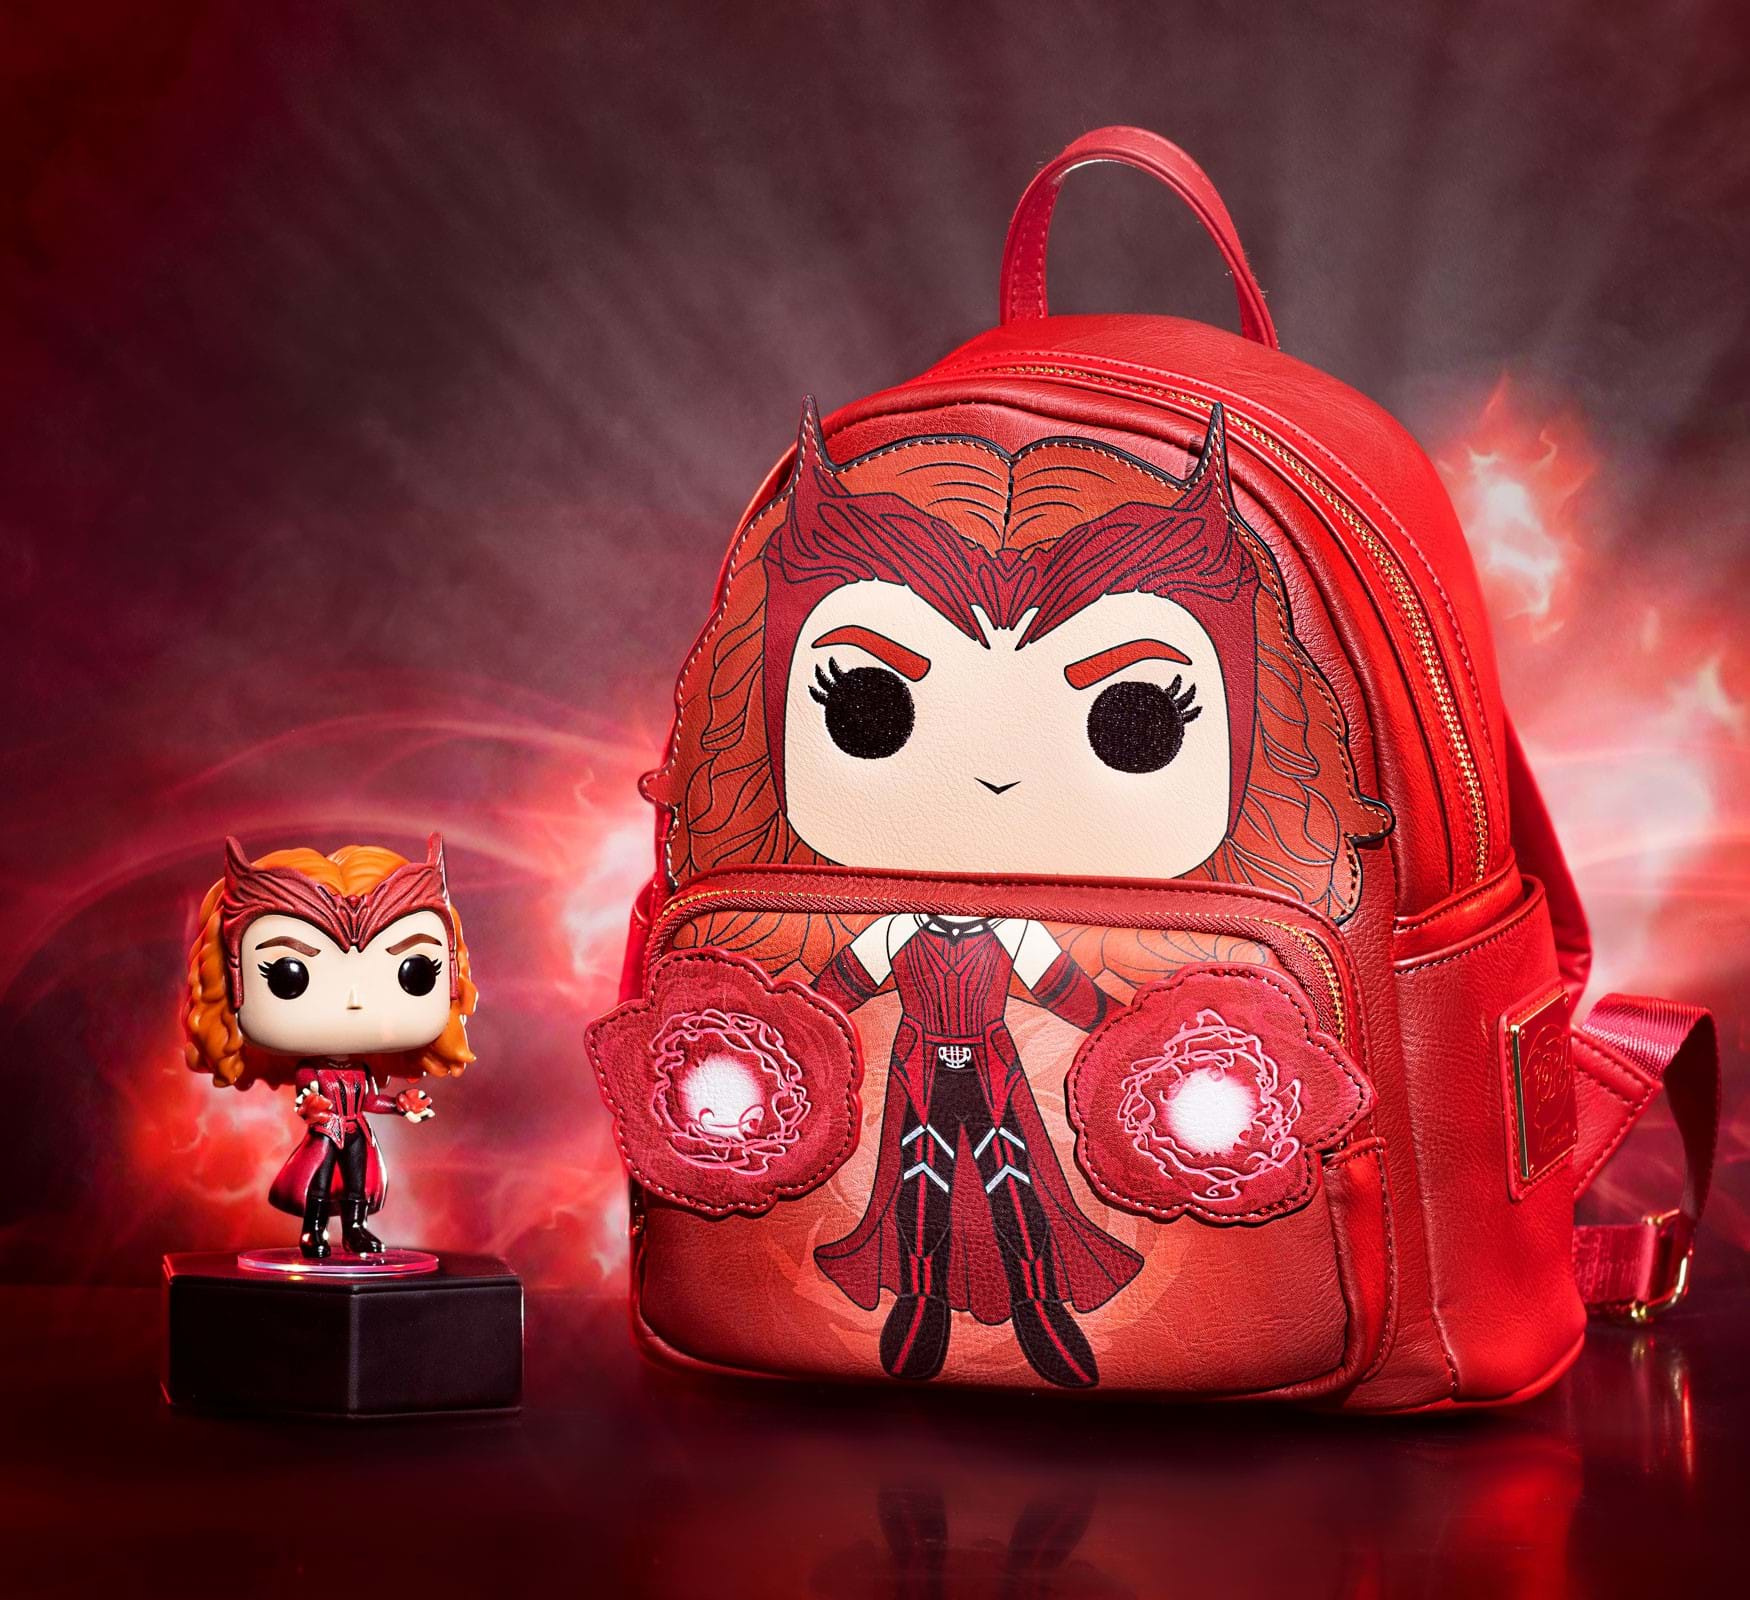 Scarlet Witch Funko Pop! and Loungefly Backpack